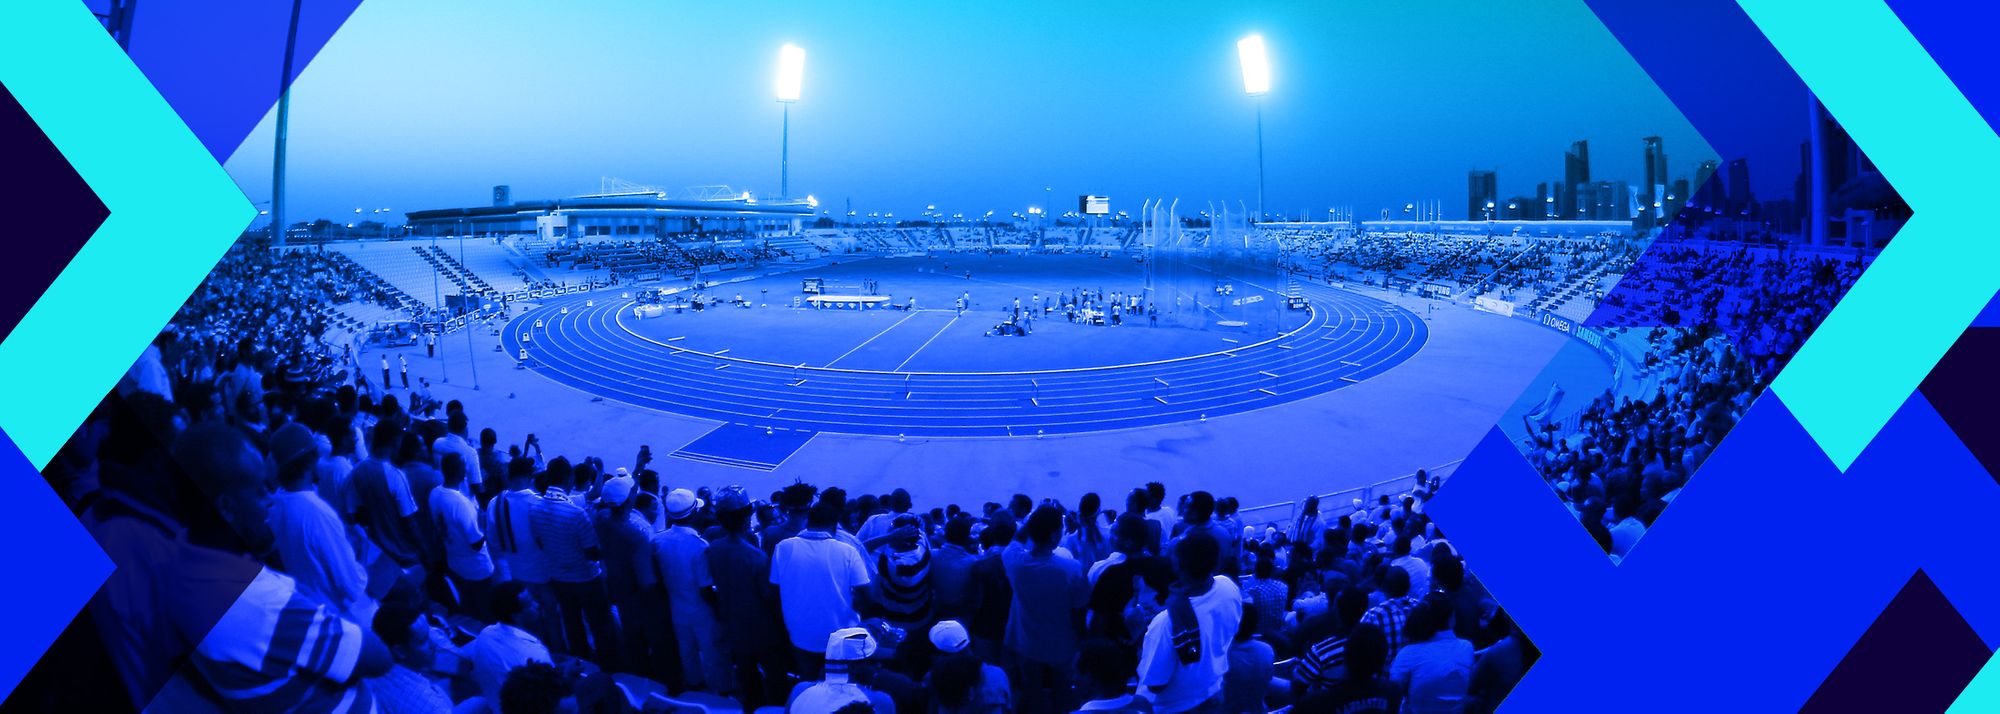 The Wanda Diamond League continues on Friday in Doha with the third meeting of the season